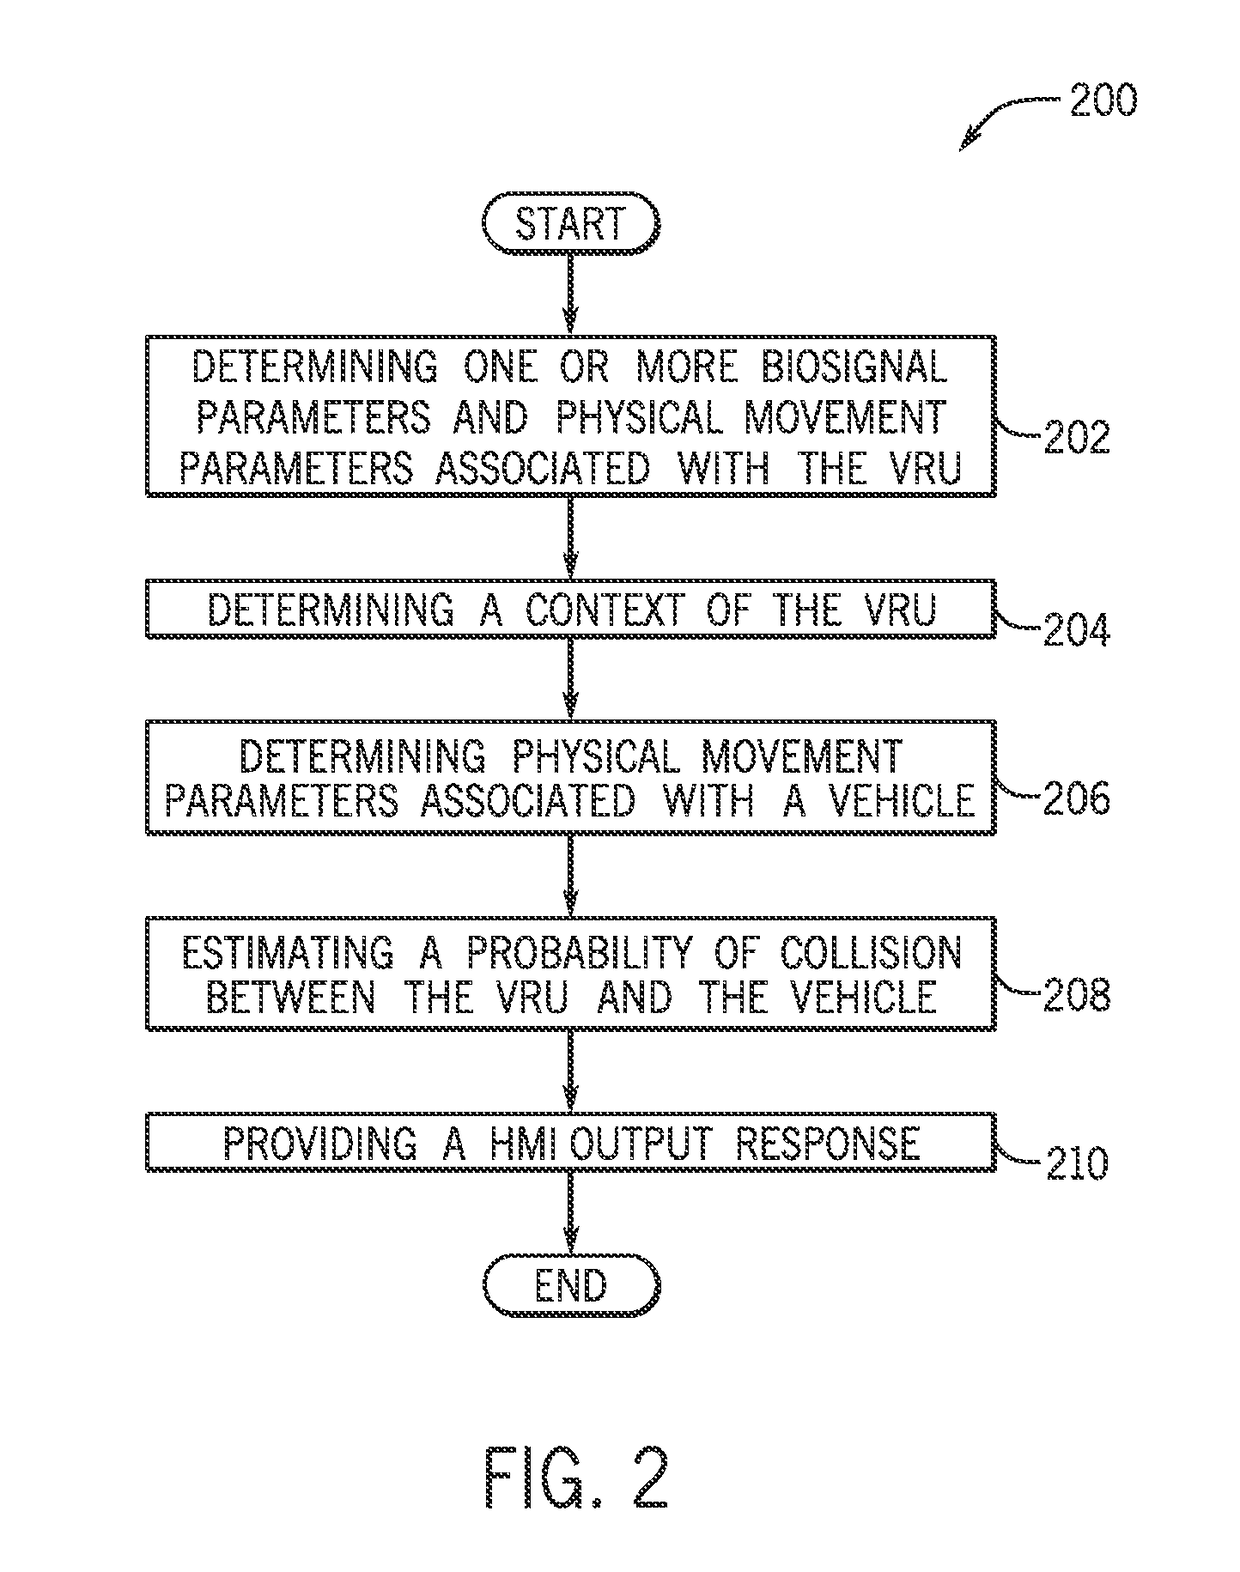 System and method for vehicle collision mitigation with vulnerable road user context sensing